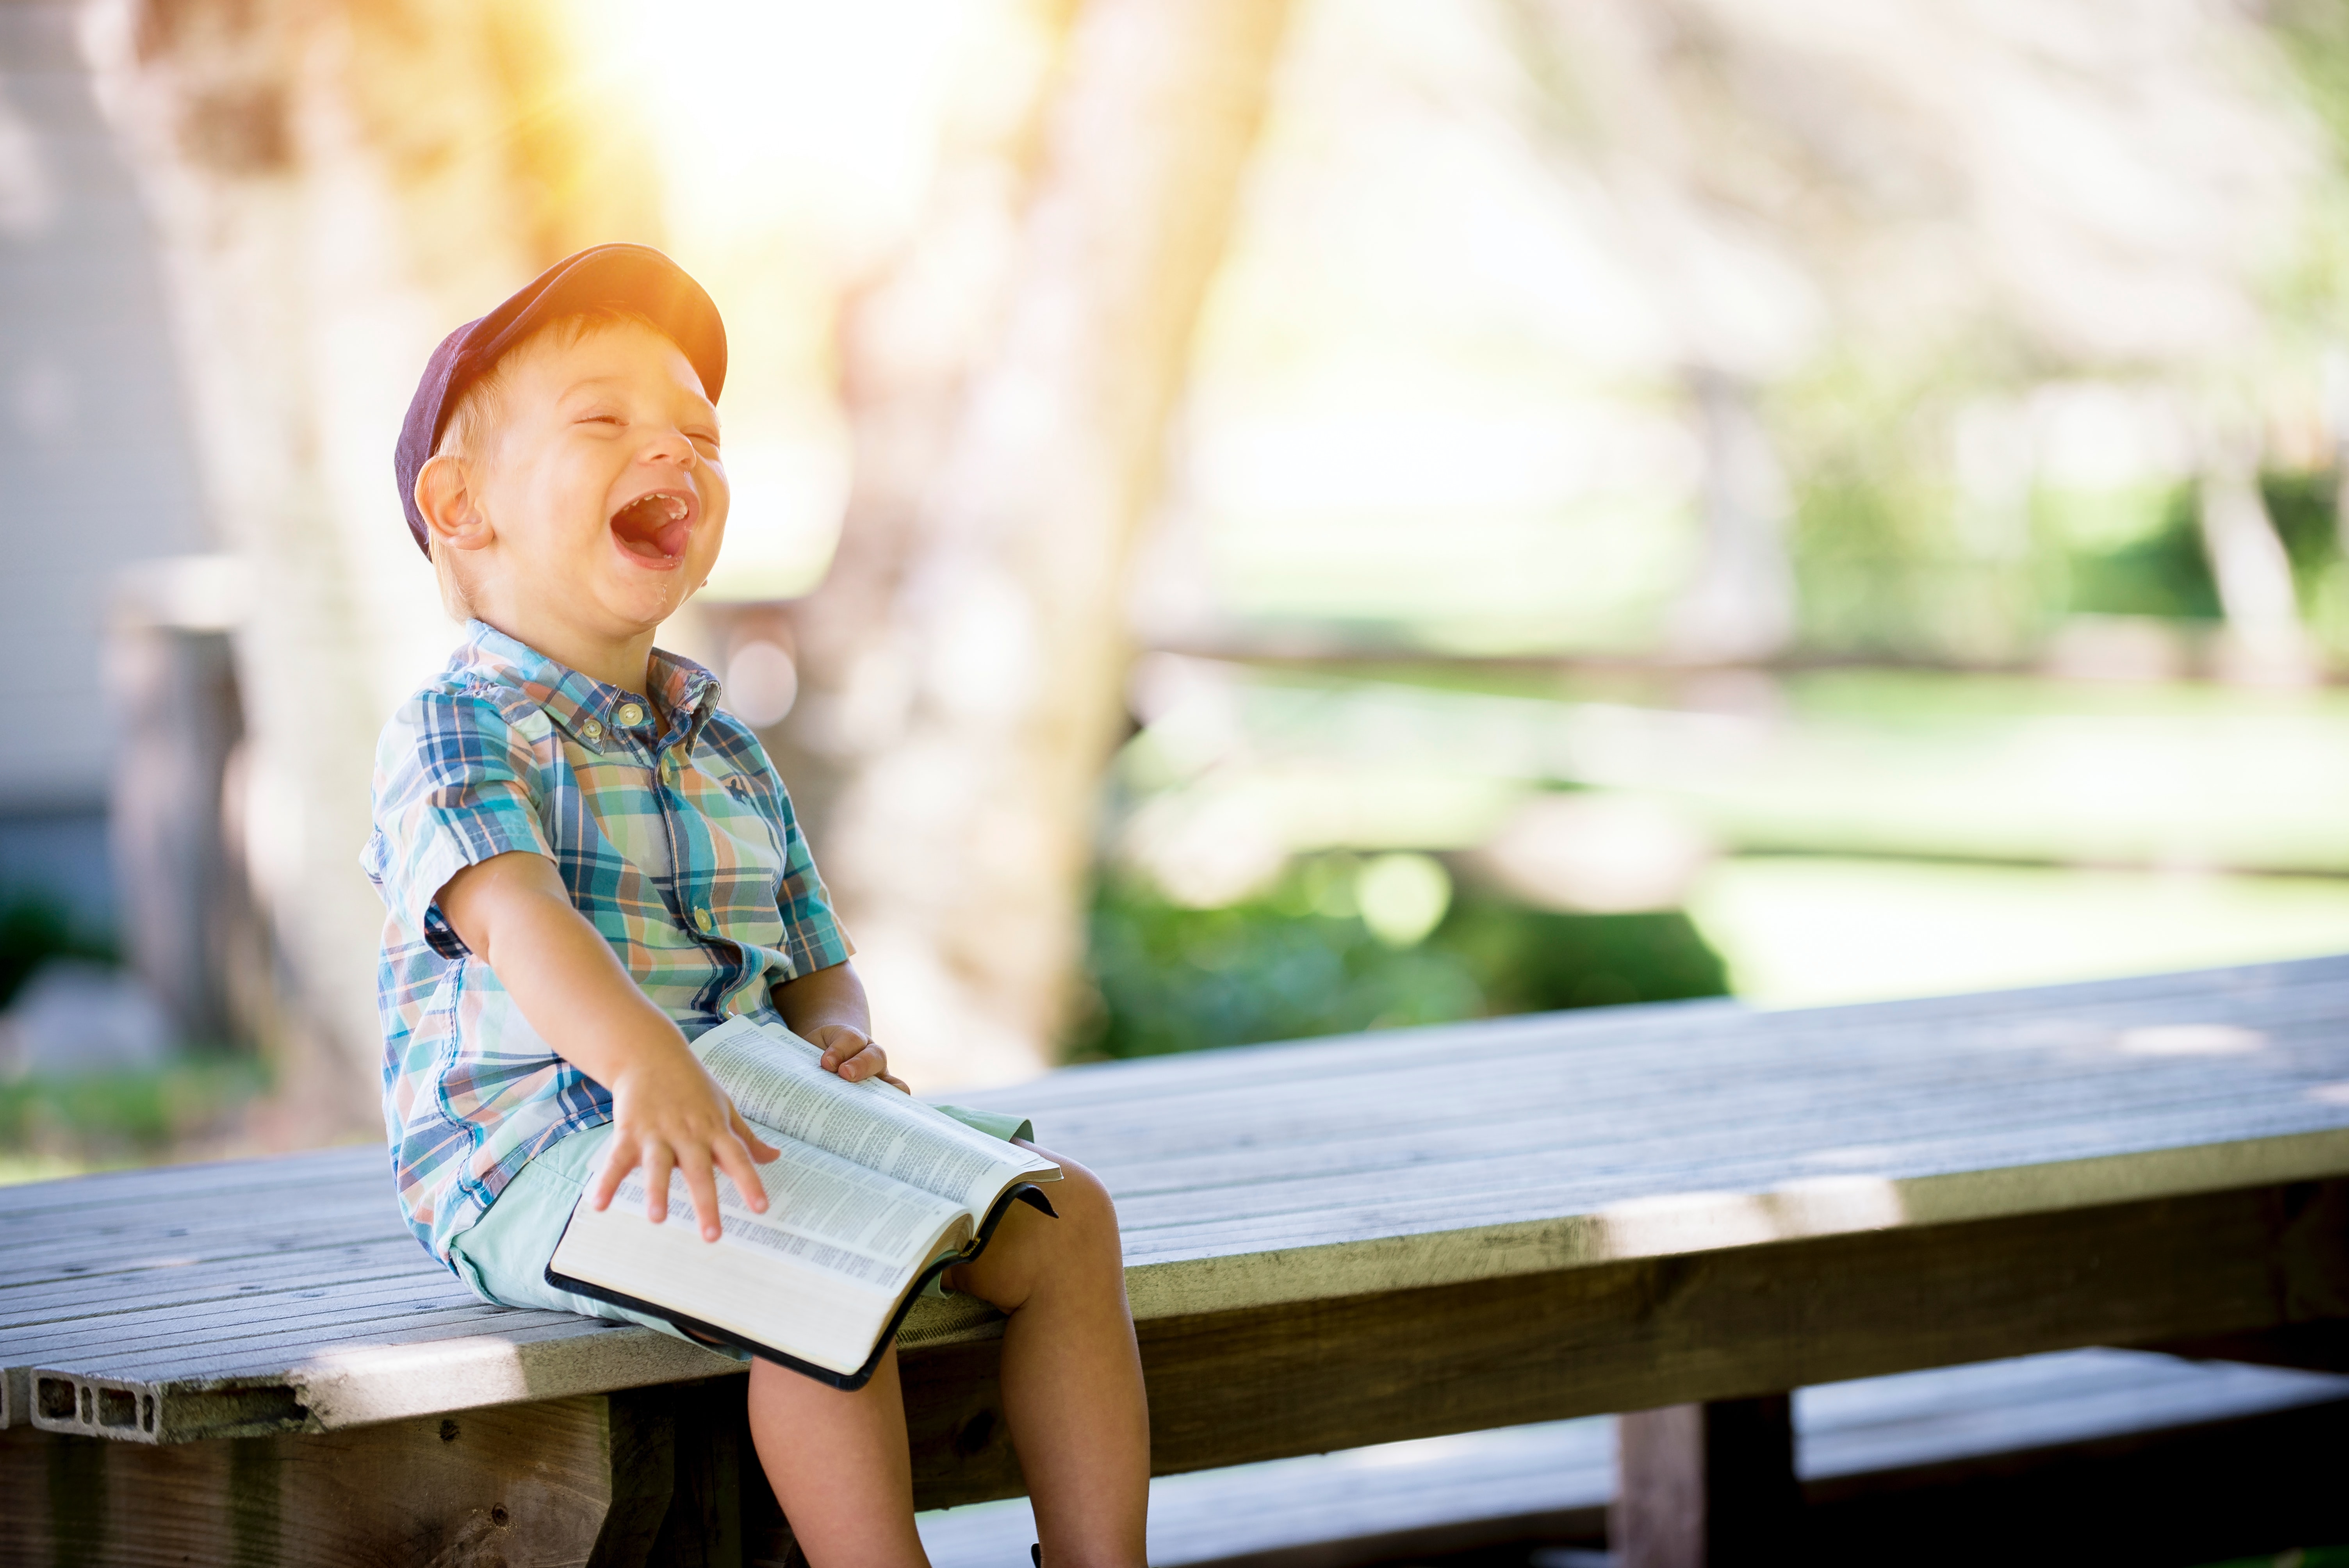 Laughing child sitting on a bench in the school yard